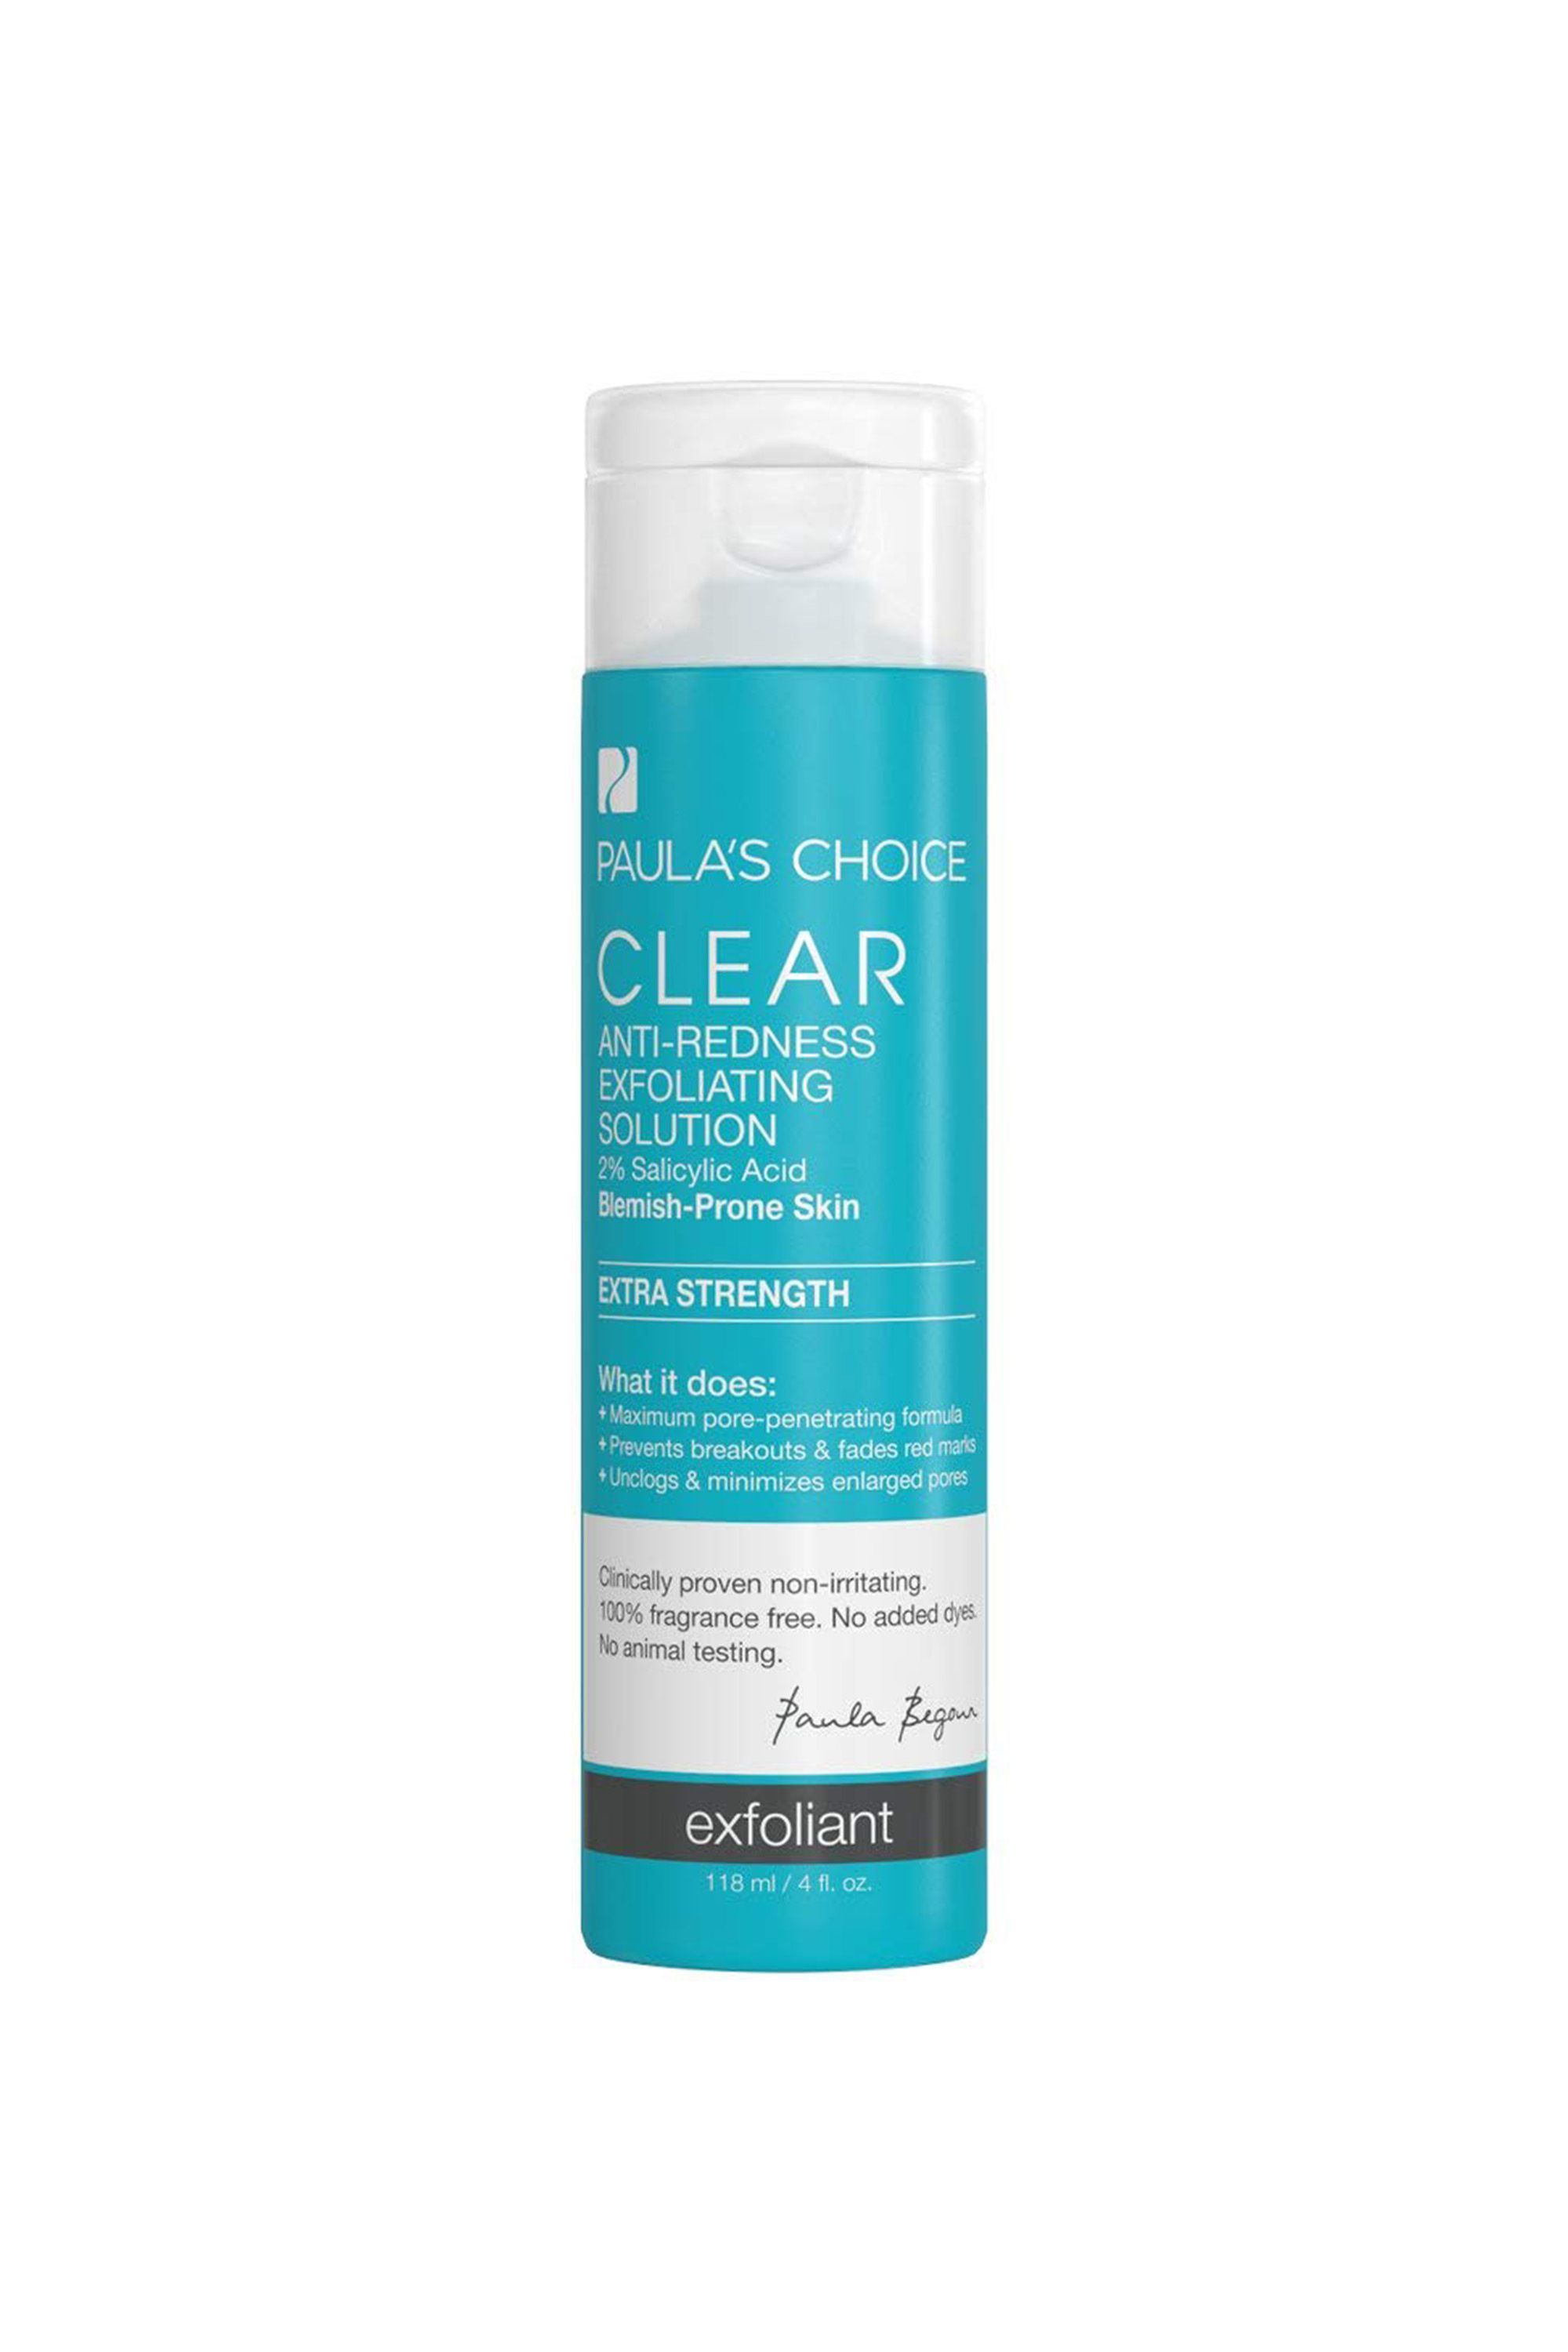 Paula's Choice-CLEAR Extra Strength Anti-Redness Exfoliating Solution 